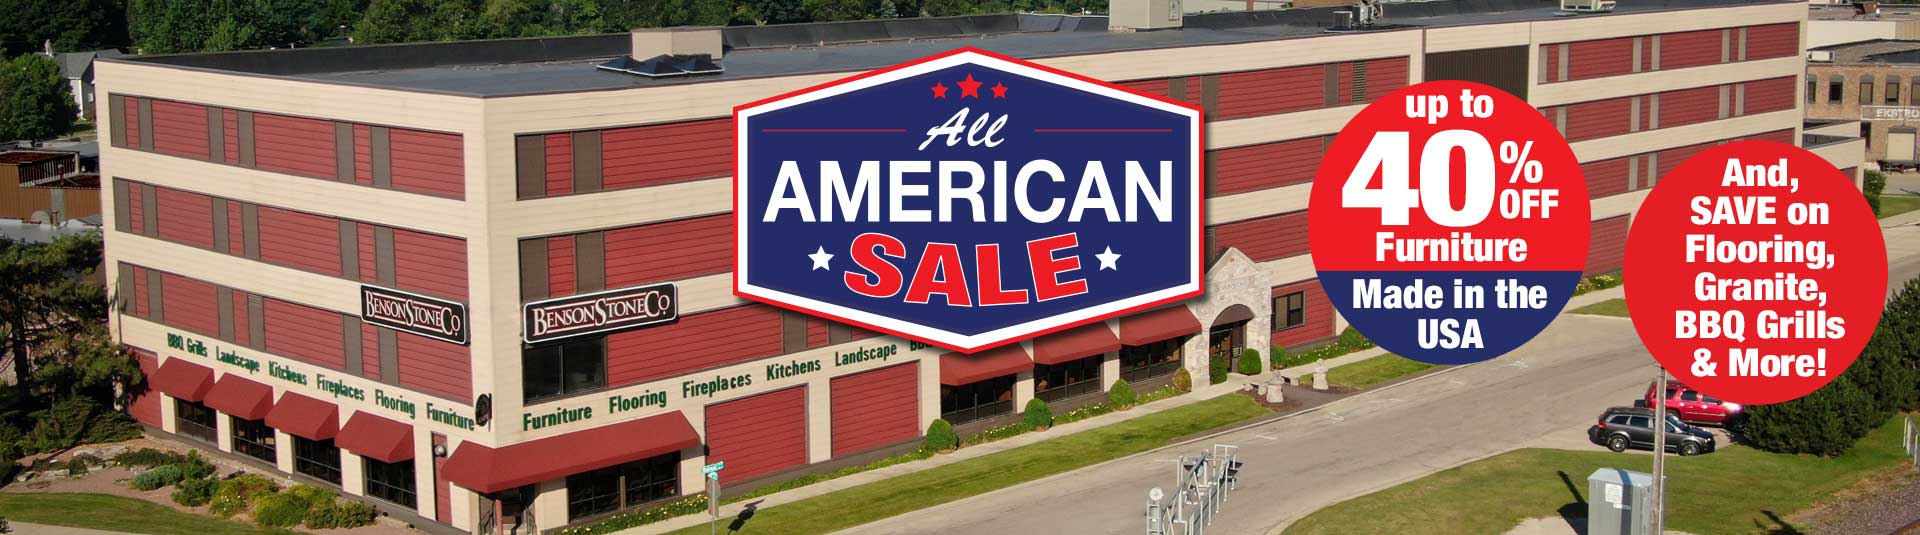 SAVE on American-Made Furniture, Flooring, BBQ Grills and More during the All American Sale at Benson Stone Company!